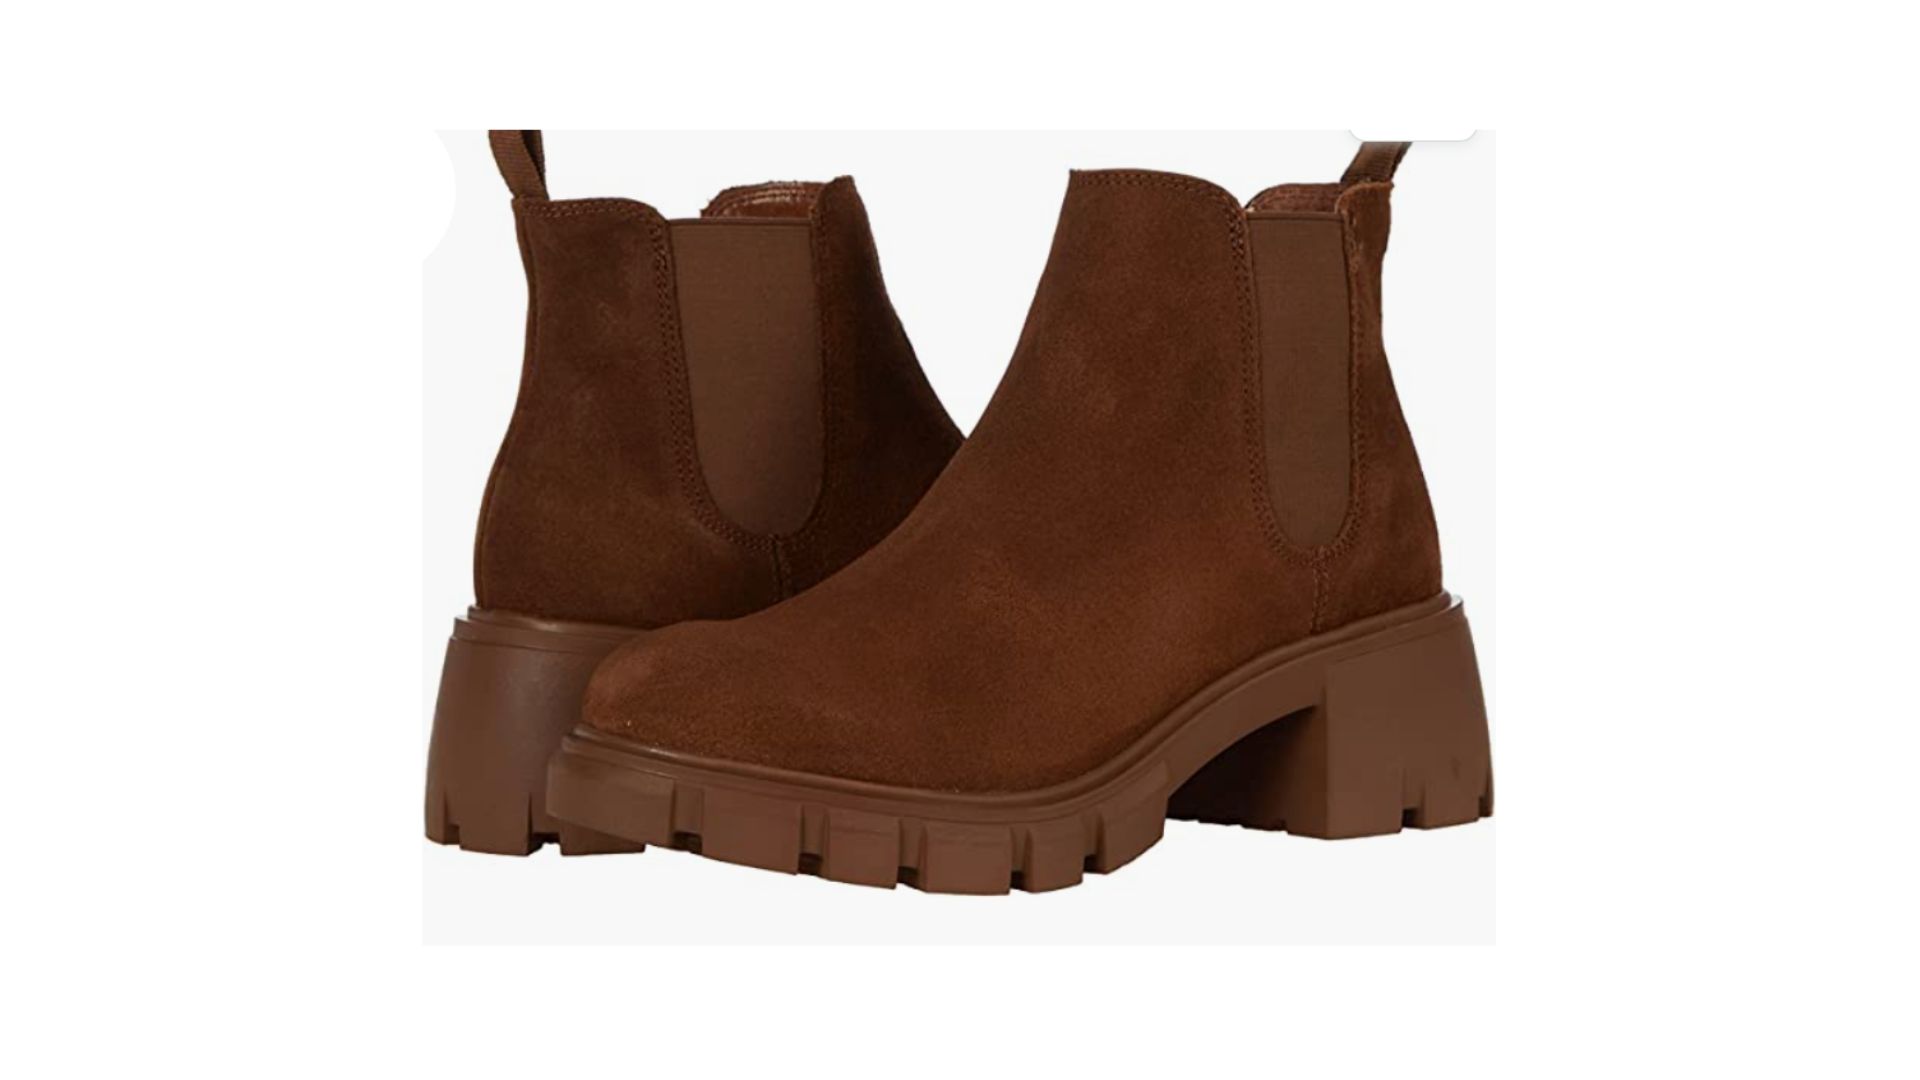 Best Fall Boots For Women Over 50